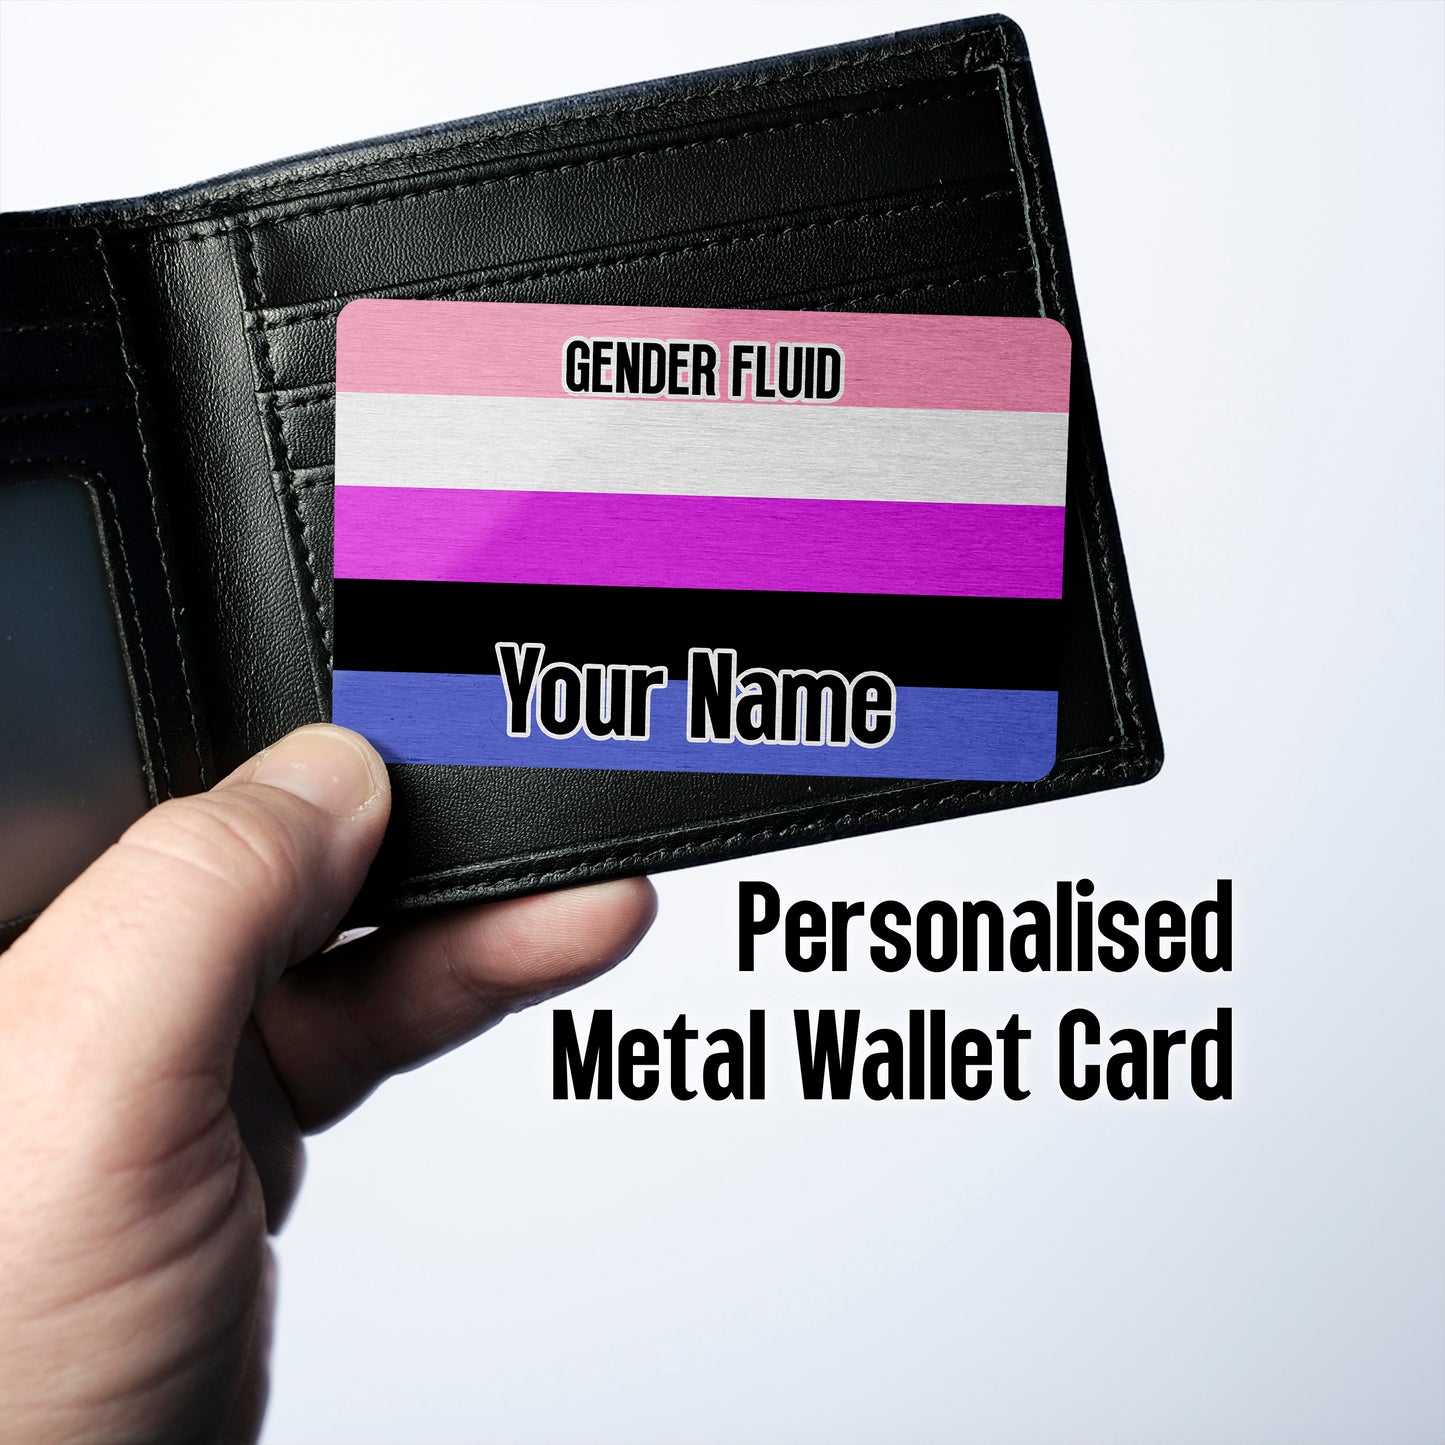 Aluminium metal wallet card personalised with your name and the gender fluid pride flag